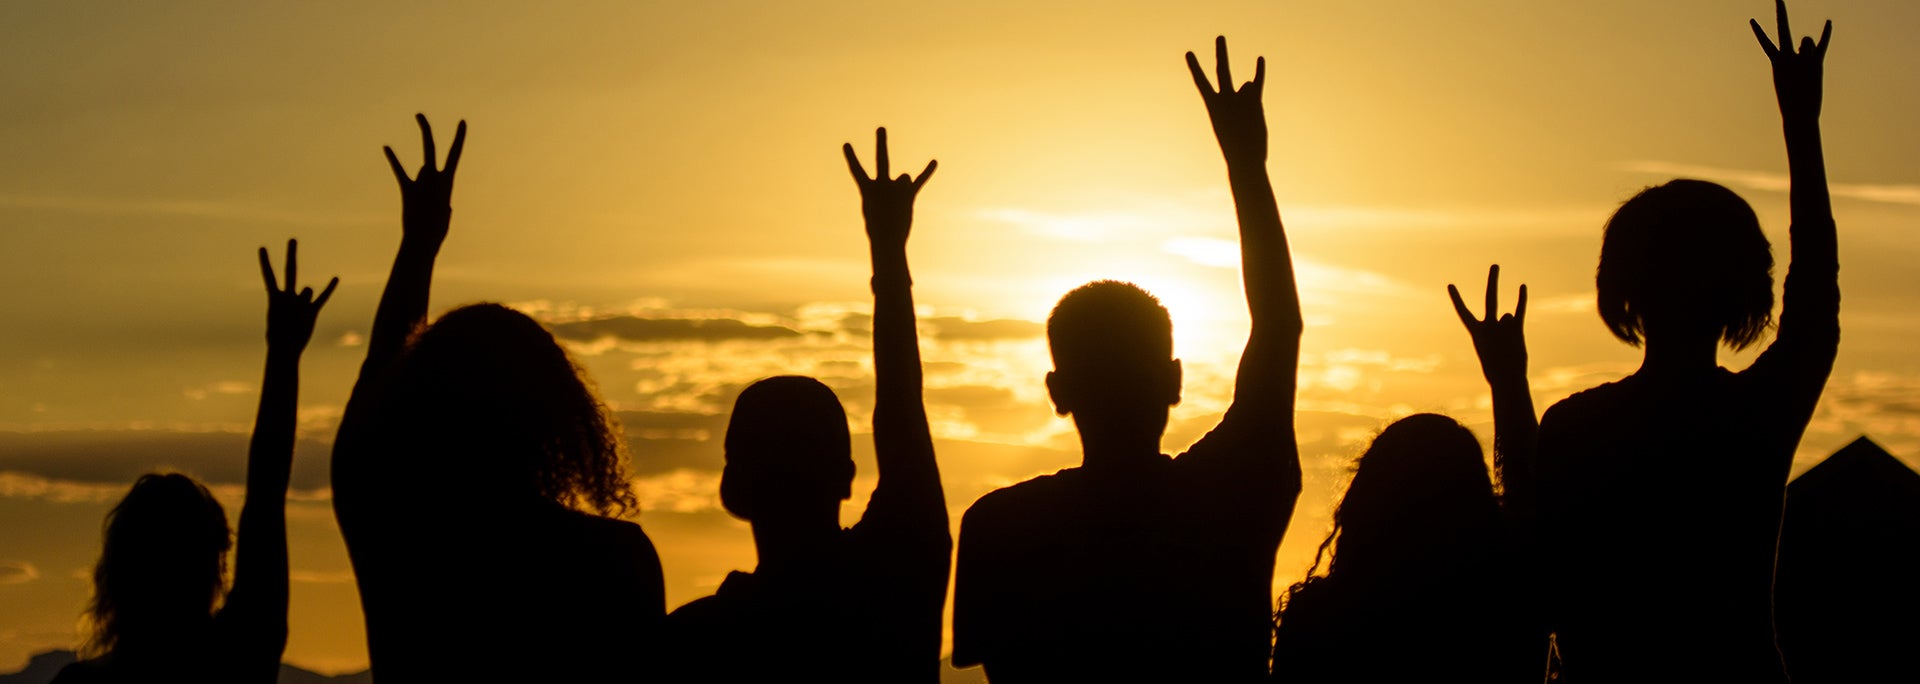 photo of student shadows at sunset holding pitchfork hands